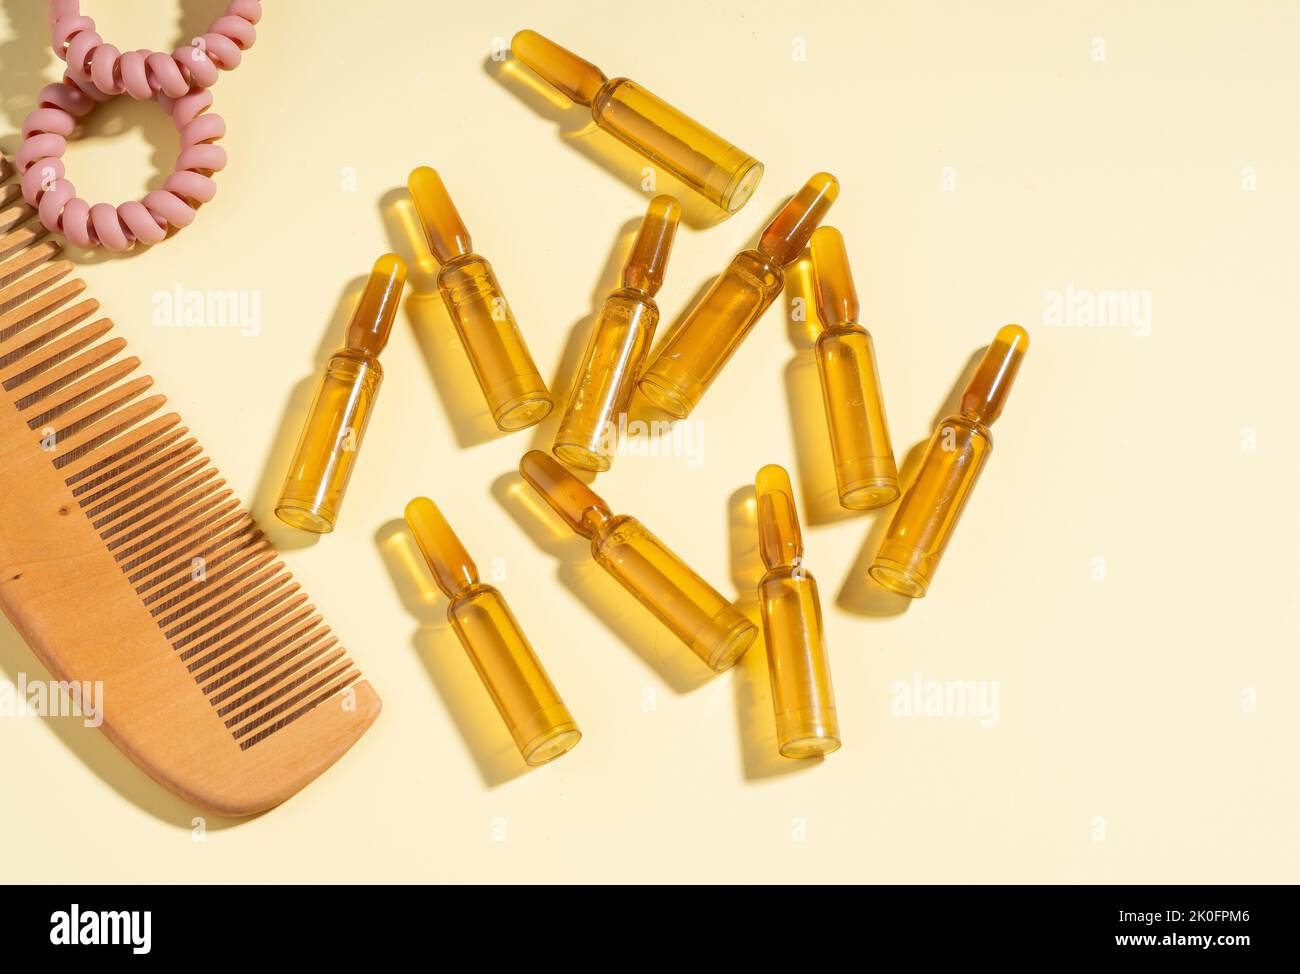 Group, set Cosmetic ampoules with serum for hair growth, restoration. Hair comb, Spiral Hair Ties on a beige background. Concept beauty hair, Self-car Stock Photo